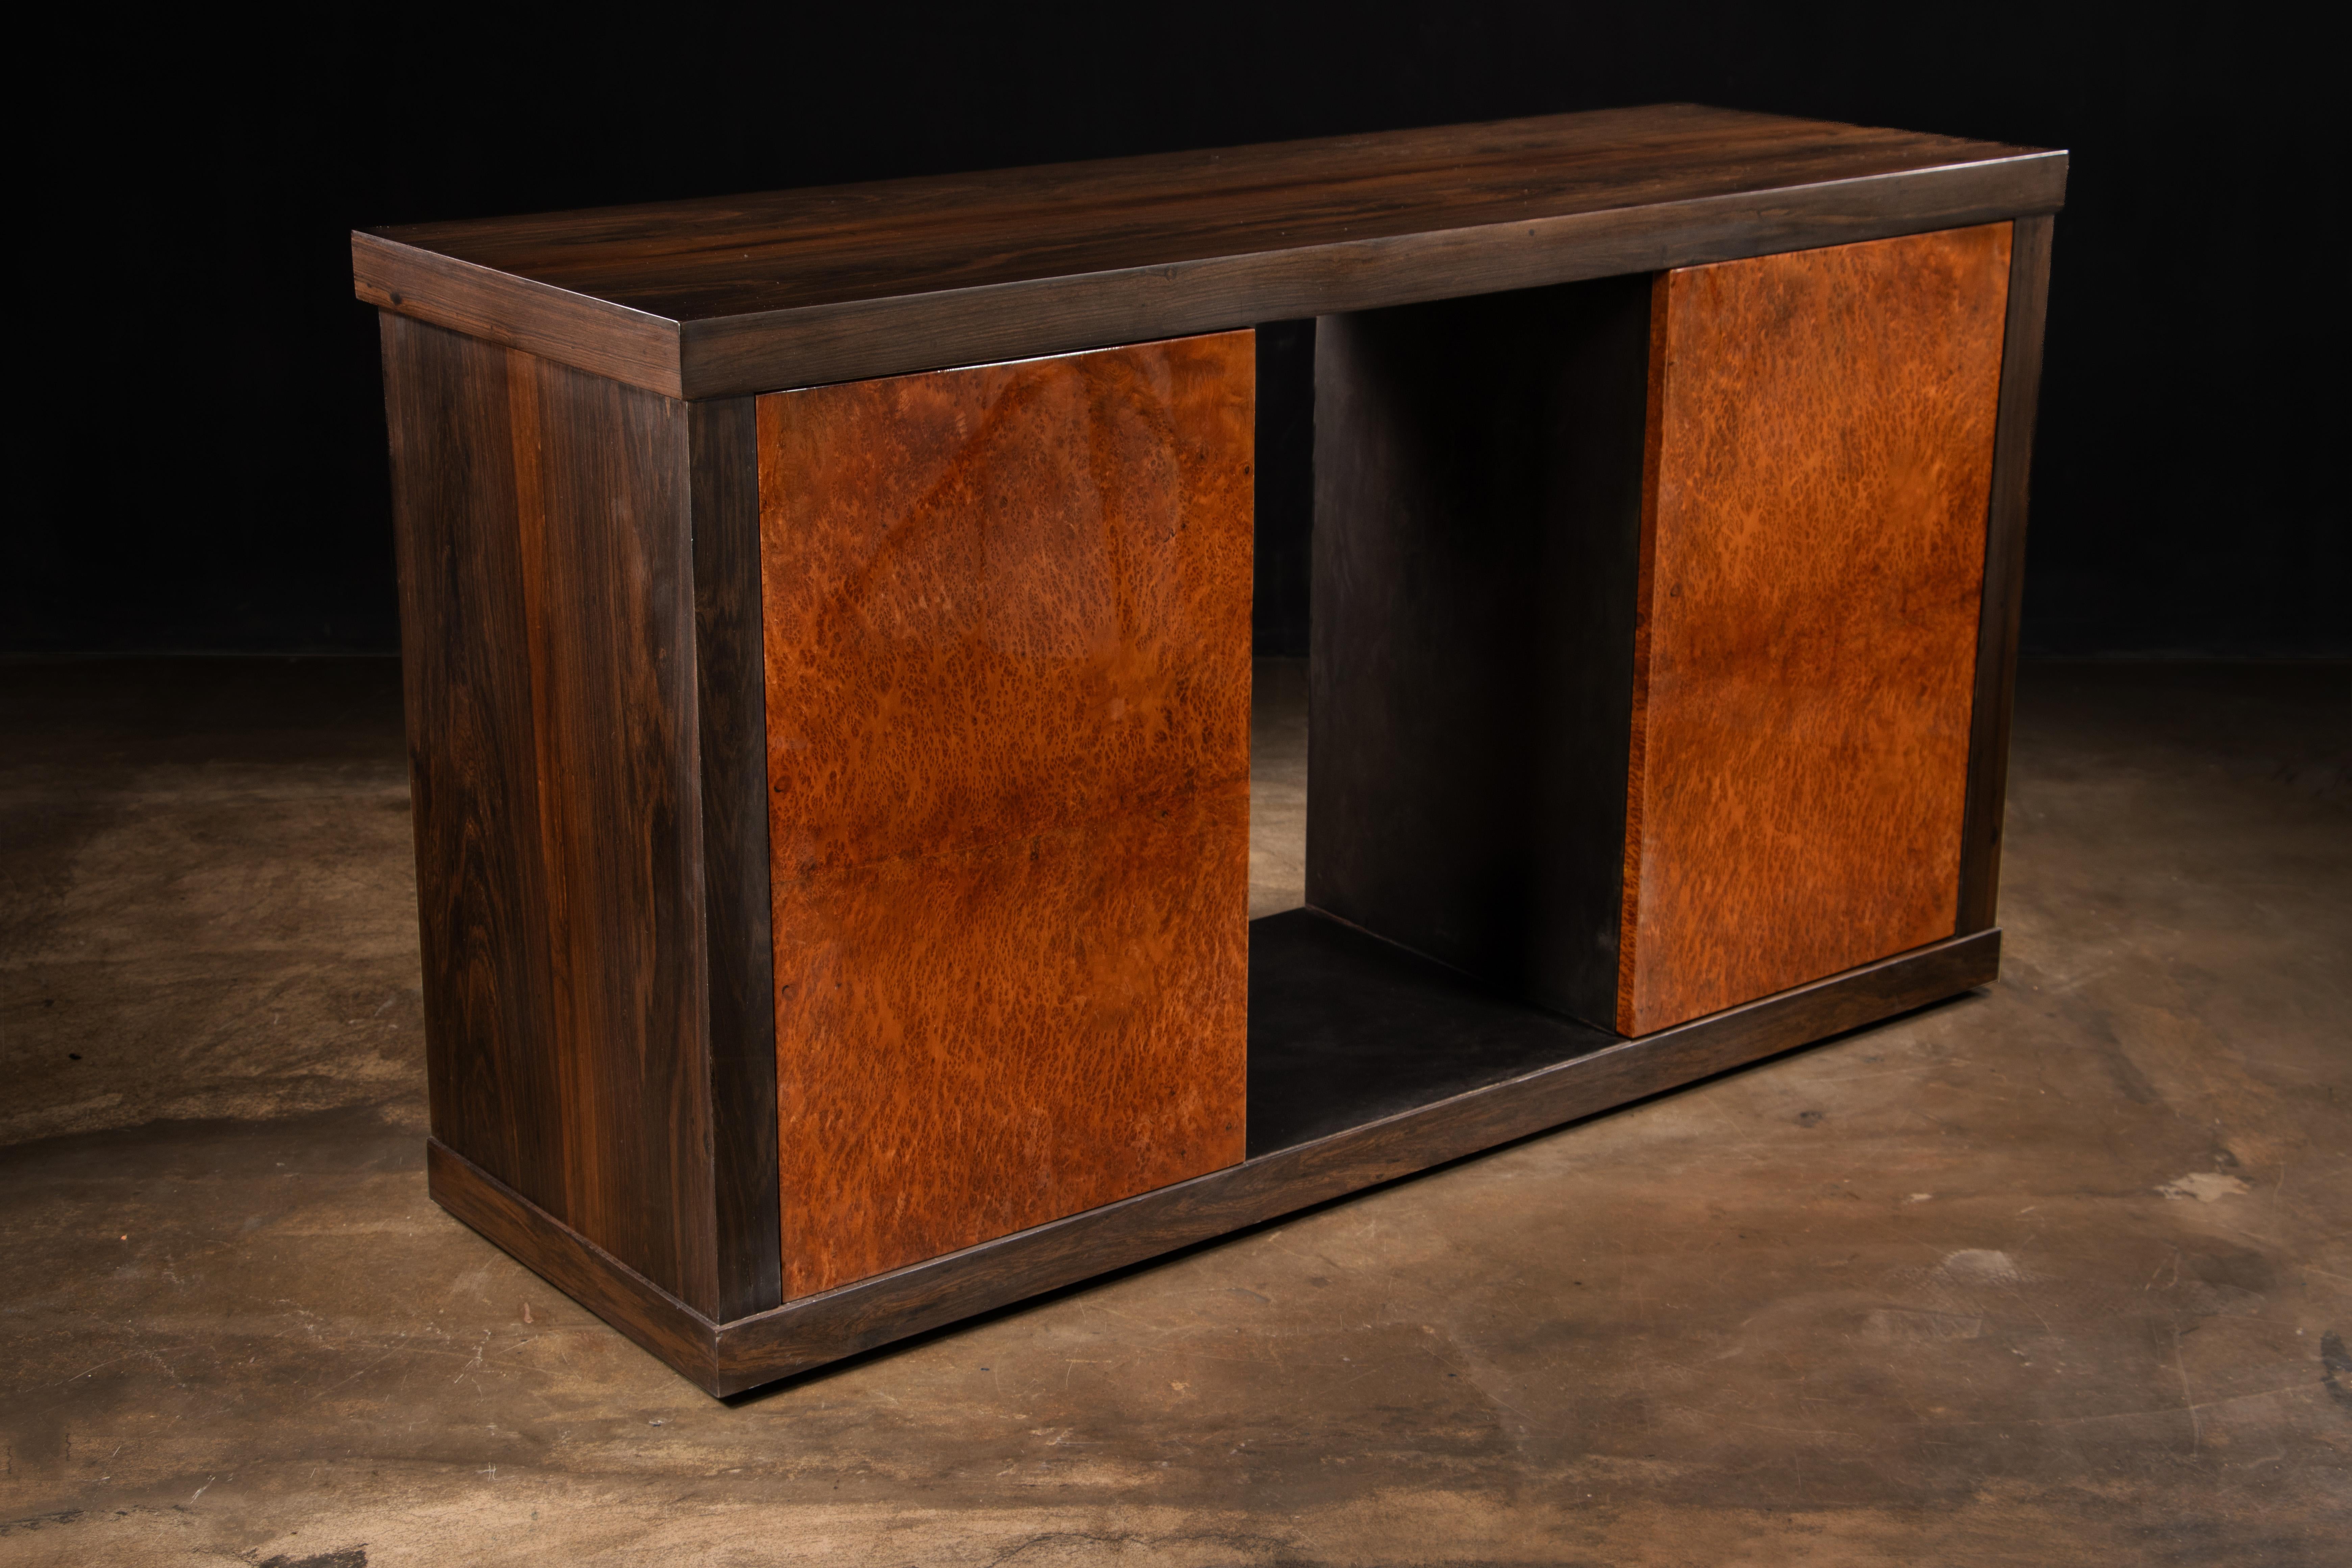 The Bertolucci Exotic Wood and Oil Rubbed Bronze Sideboard (2 doors) from Costantini Design features high gloss Vavona Burl doors, a dark walnut frame, and oil rubbed bronze inlays.  Available as shown or in the finish, wood species and size of your